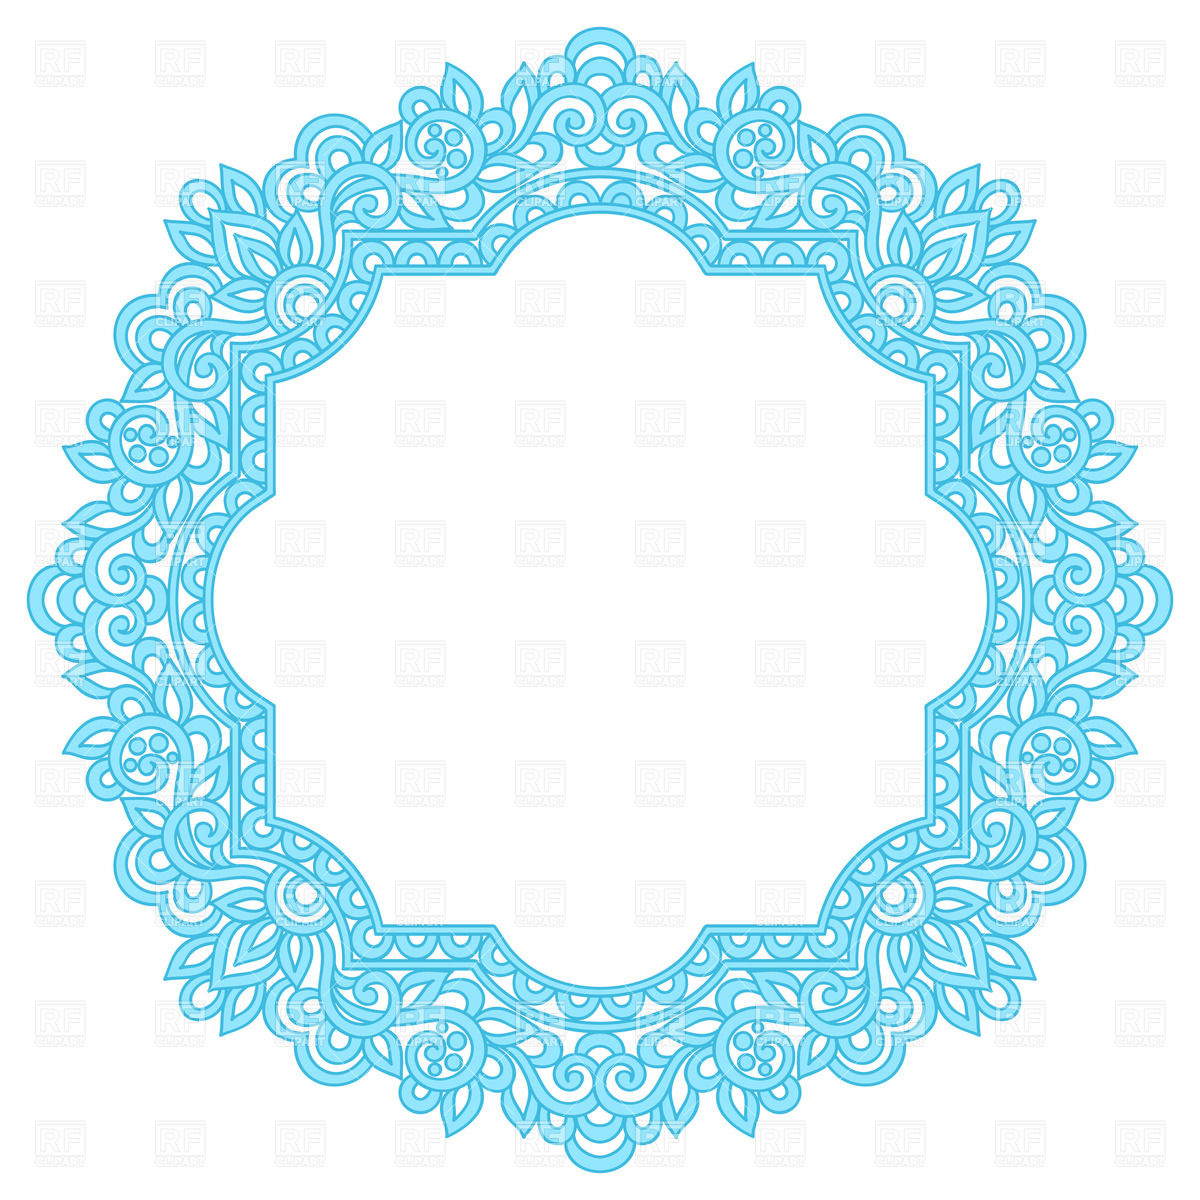 Blue Round Herbal Ornament 28613 Borders And Frames Download    